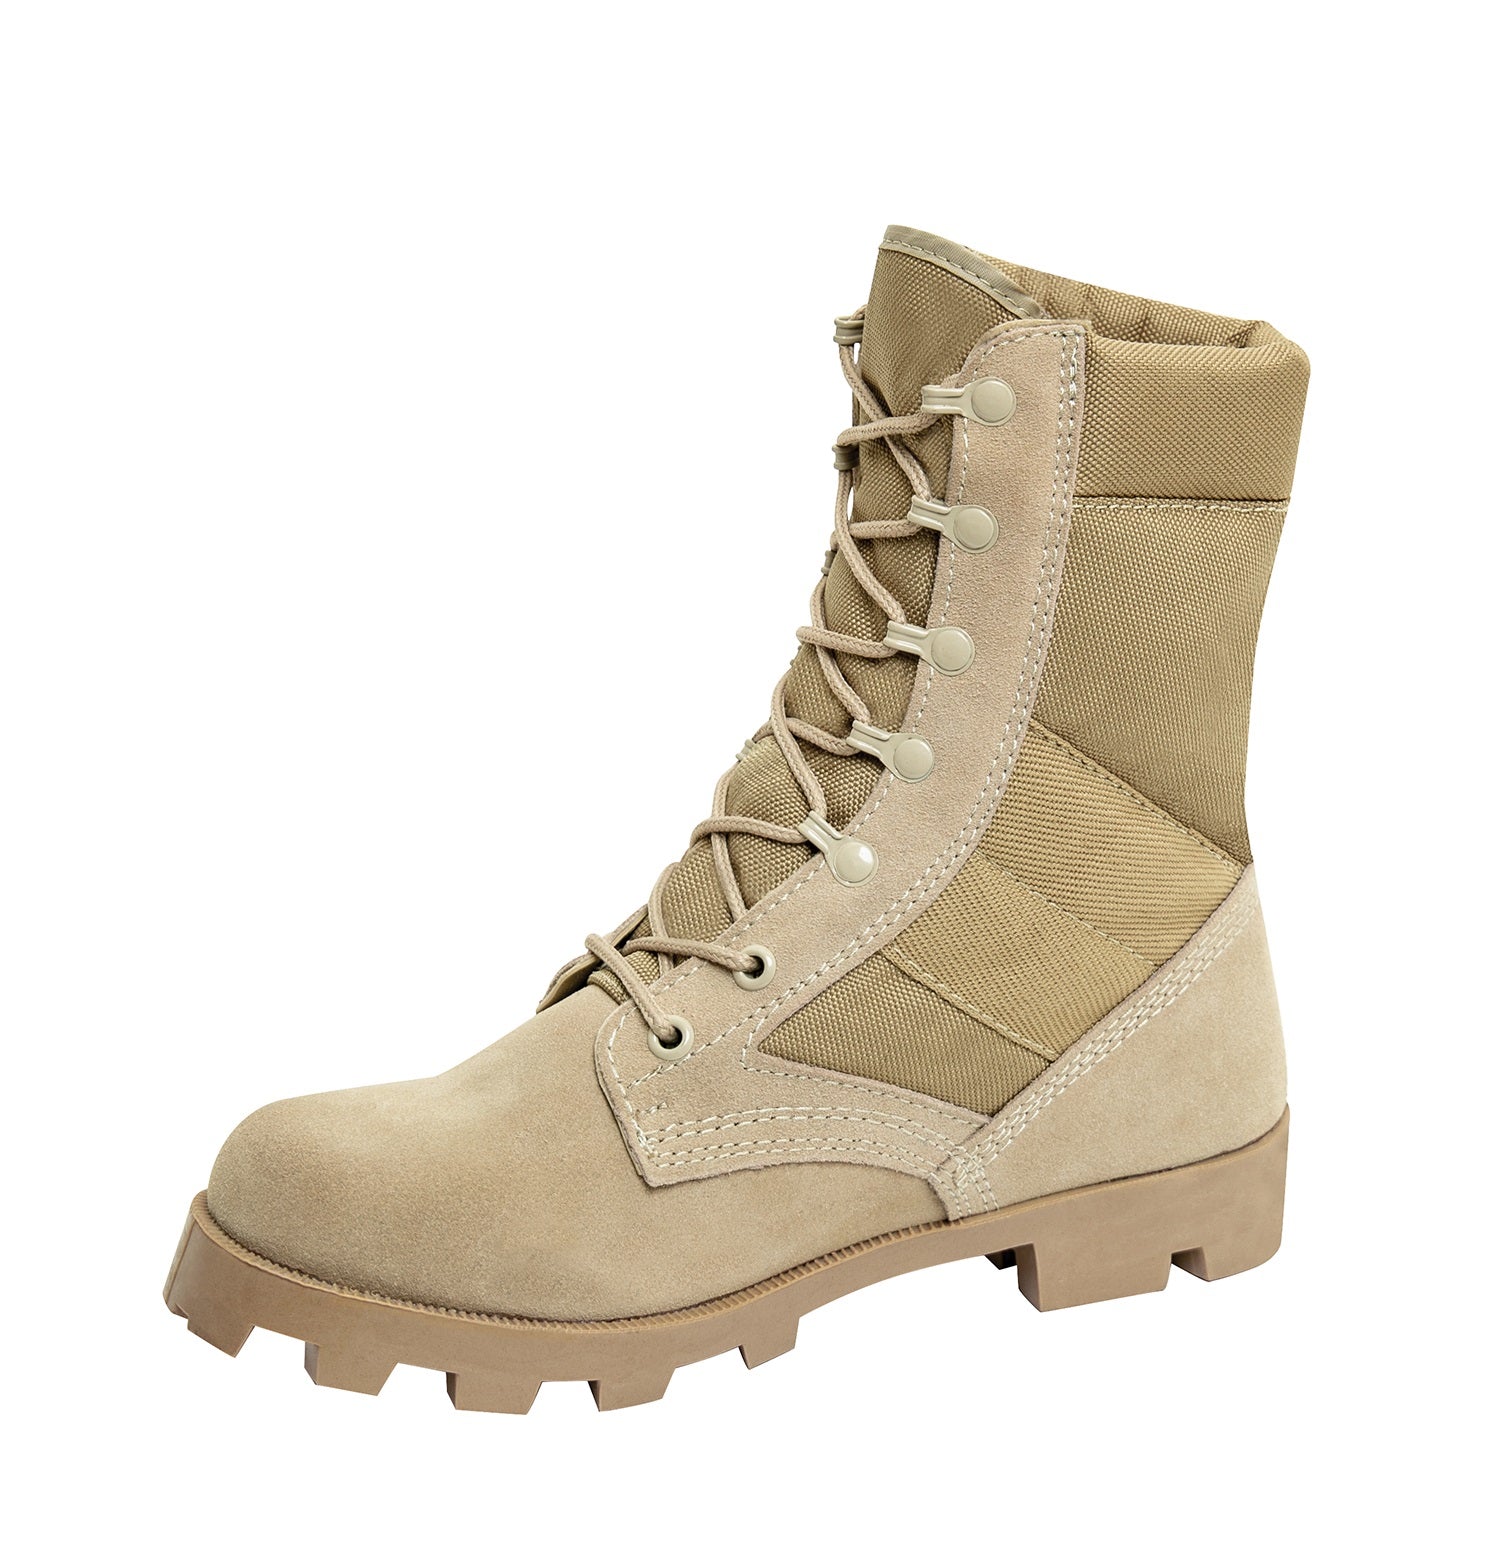 Rothco G.I. Type Speedlace Combat / Jungle Boot - Coyote Brown